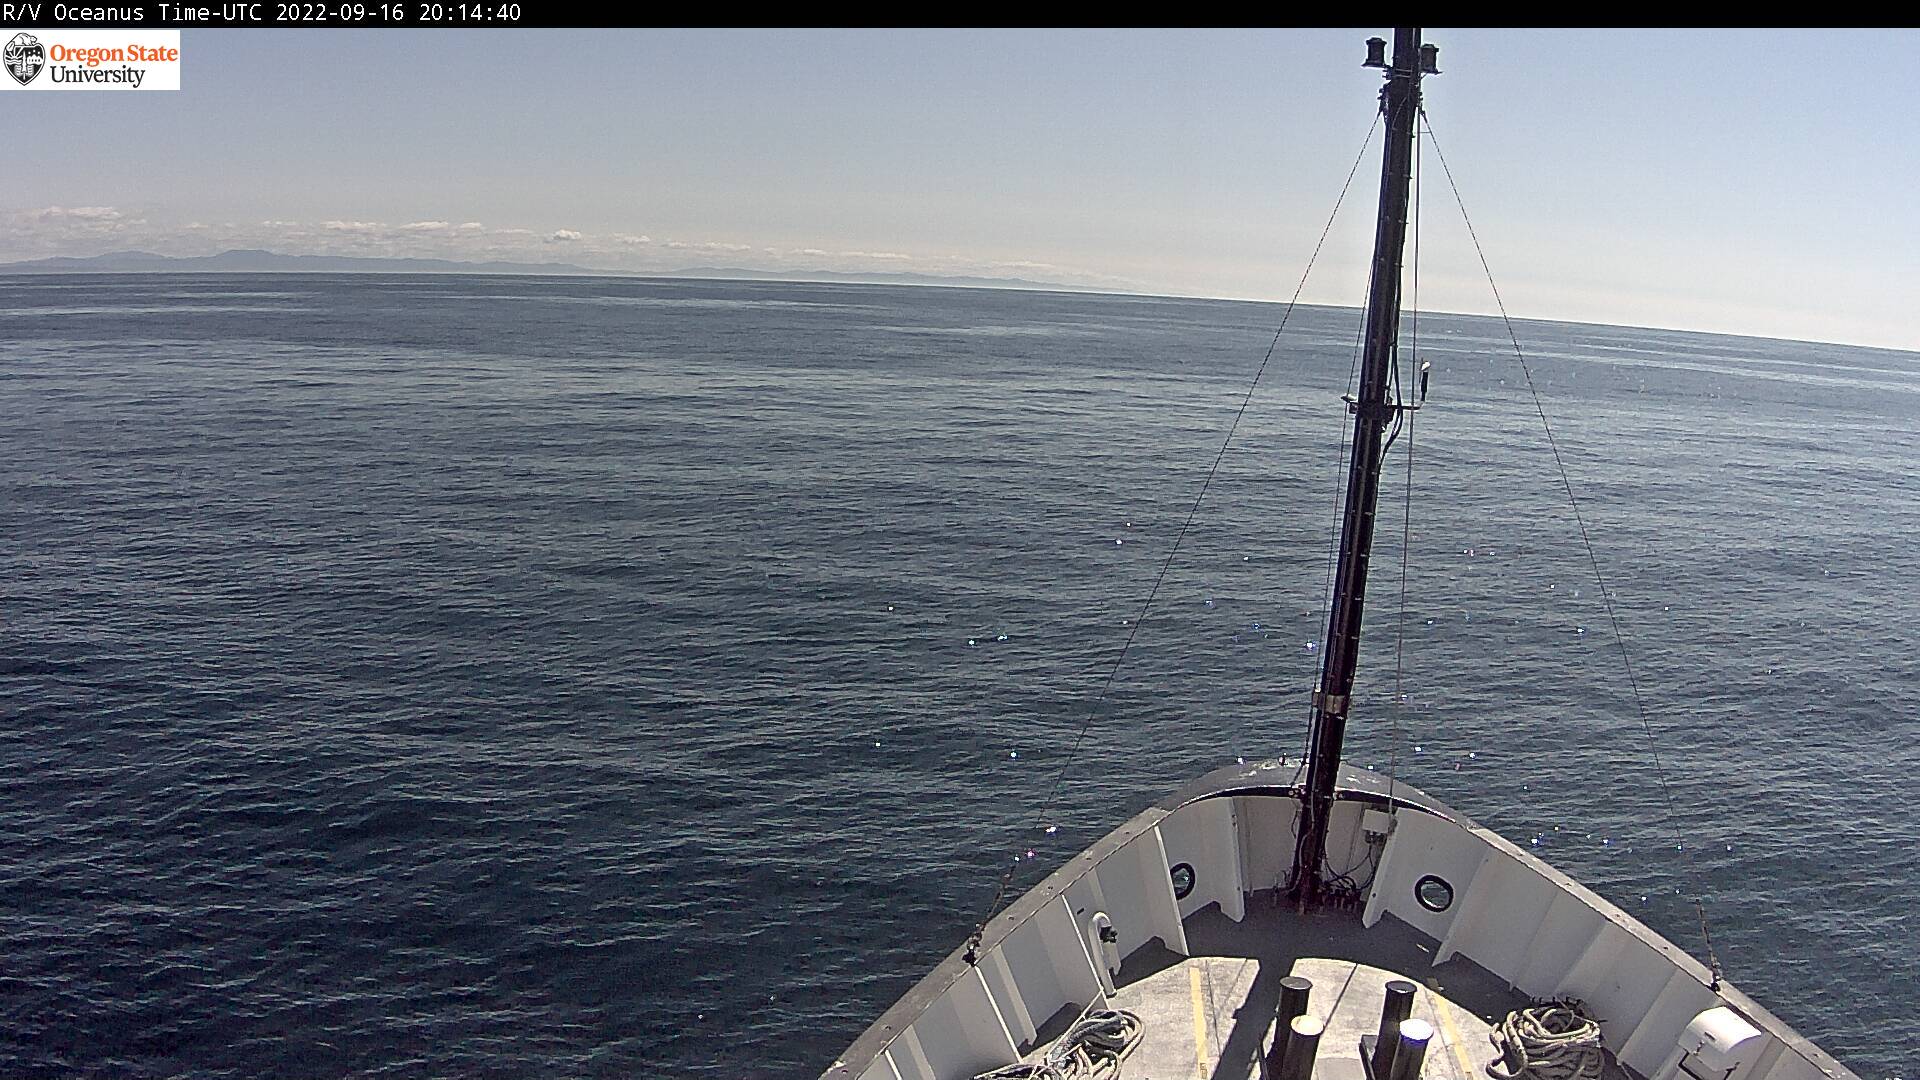 Image from Research Boat on the Pacific Ocean